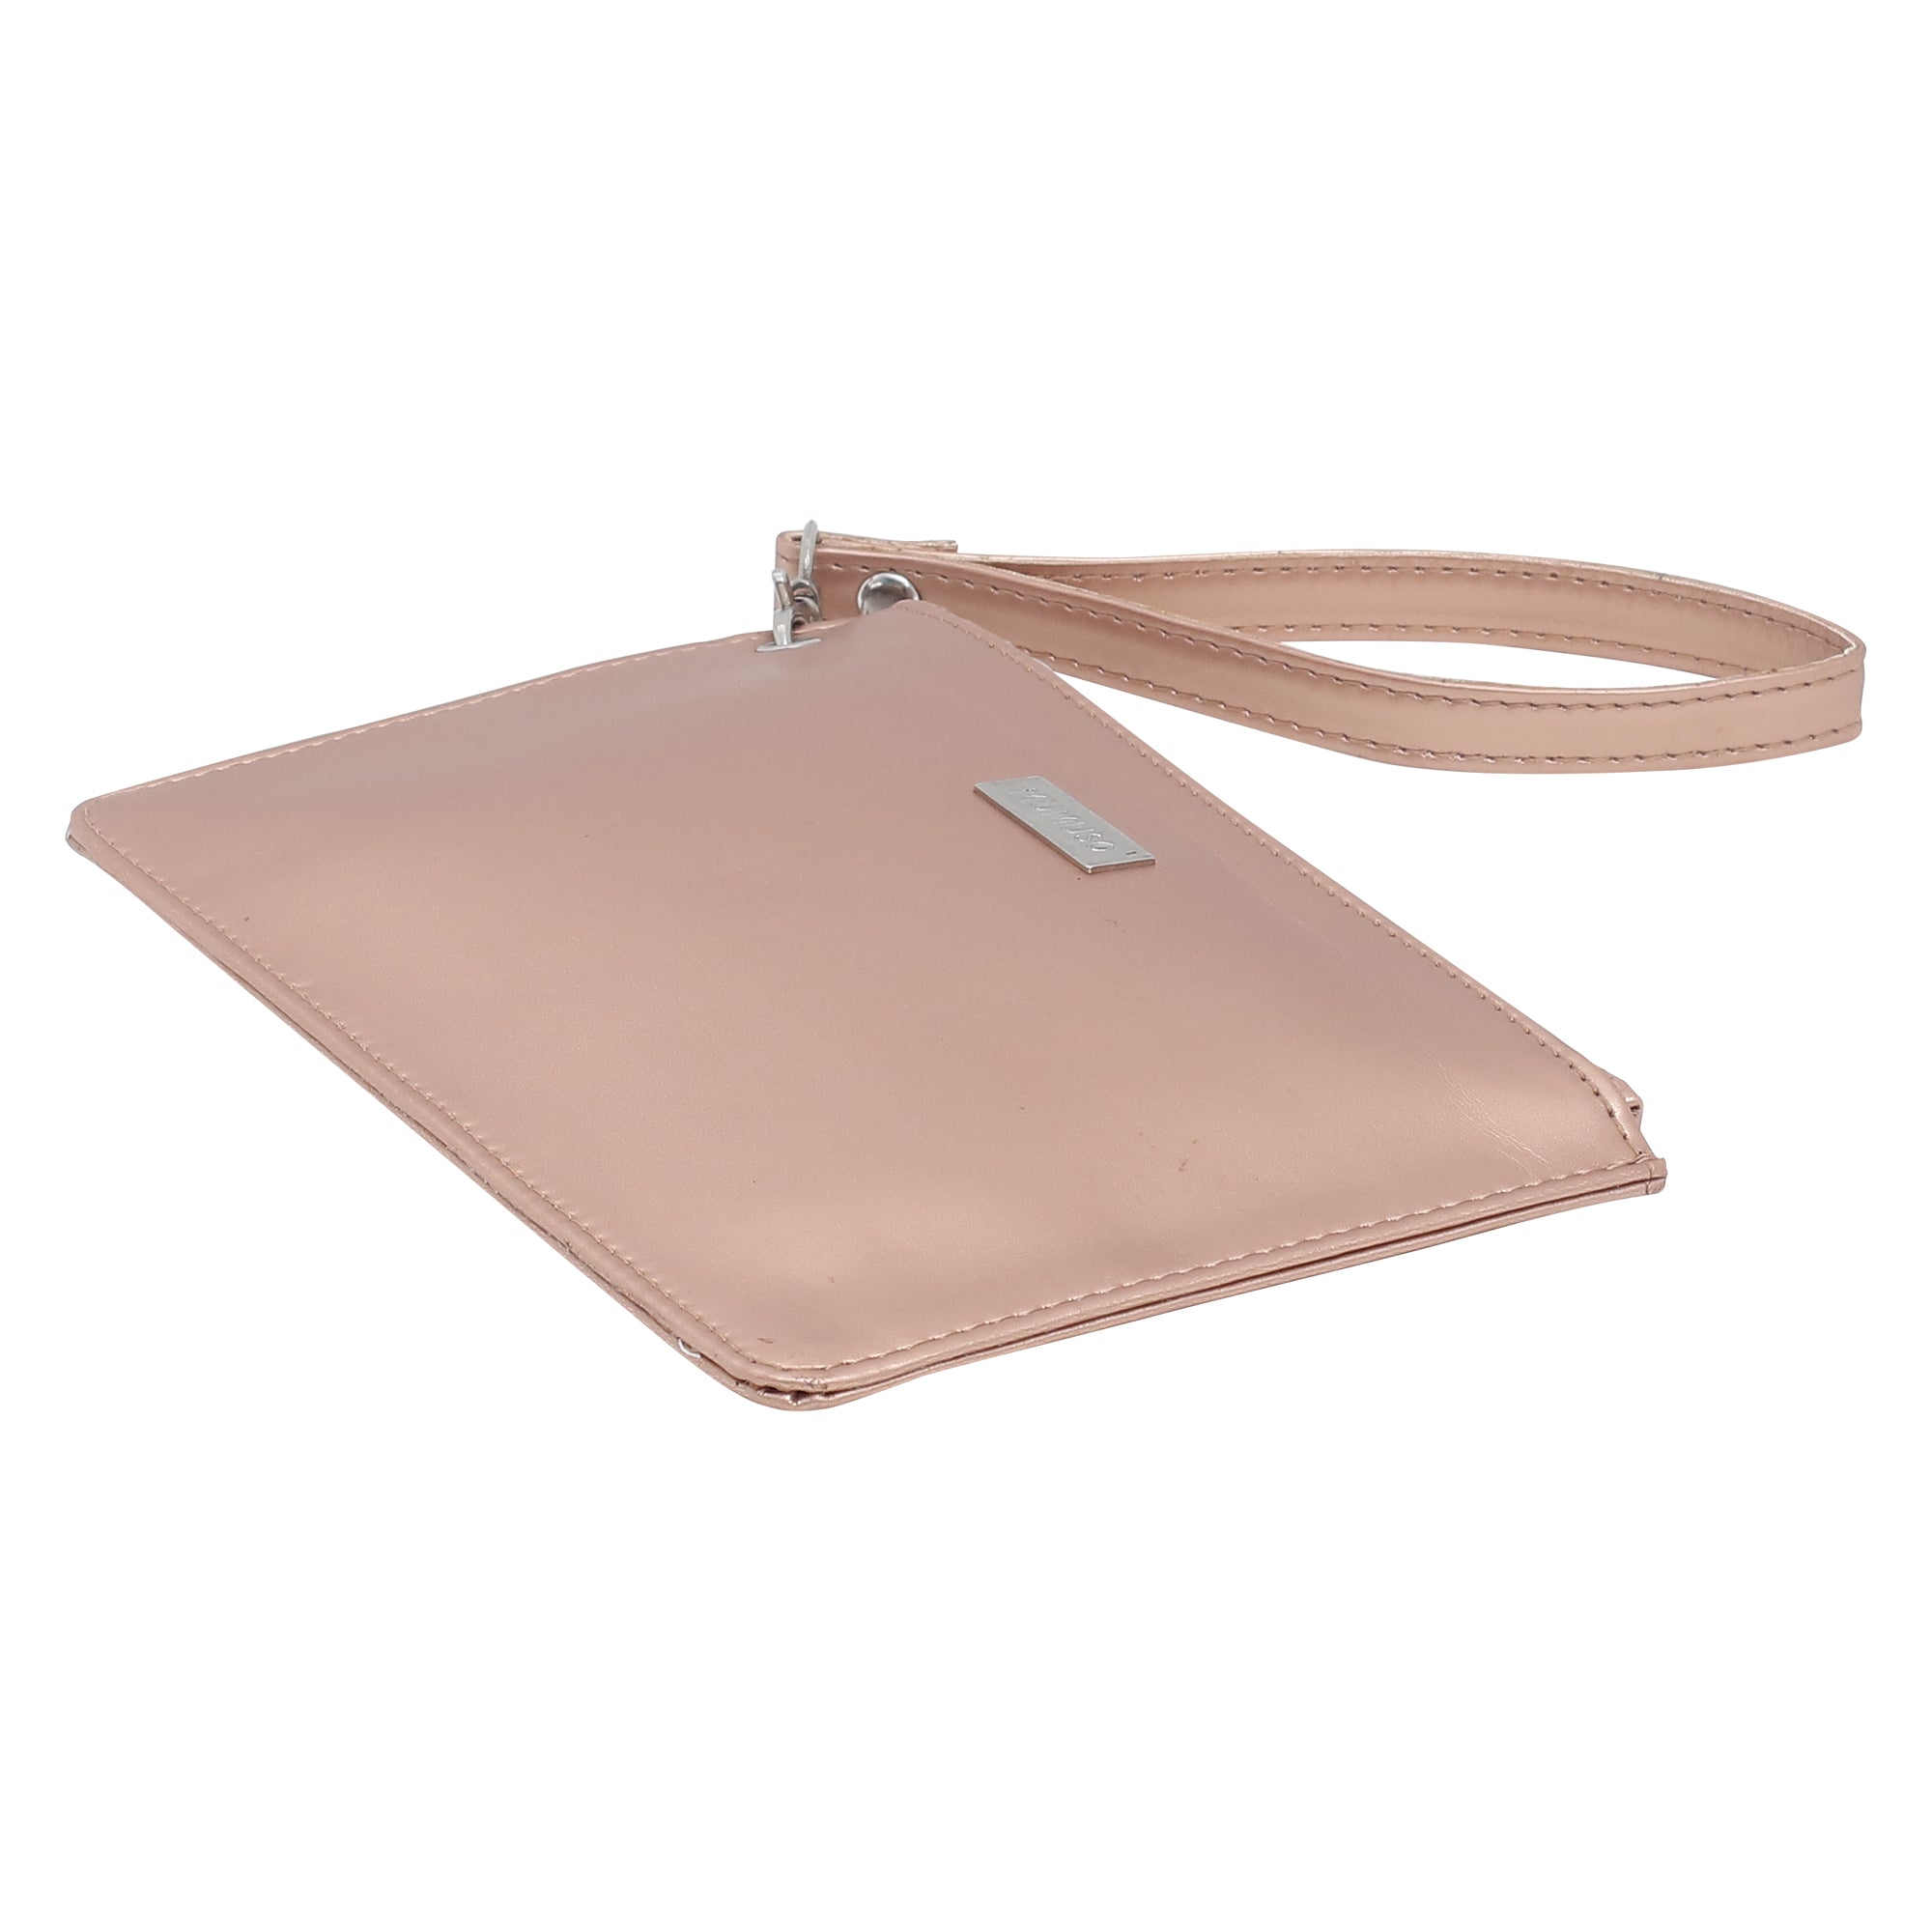 Crimsaclutch Rose Gold Ombre Leather - Bags from Moda in Pelle UK